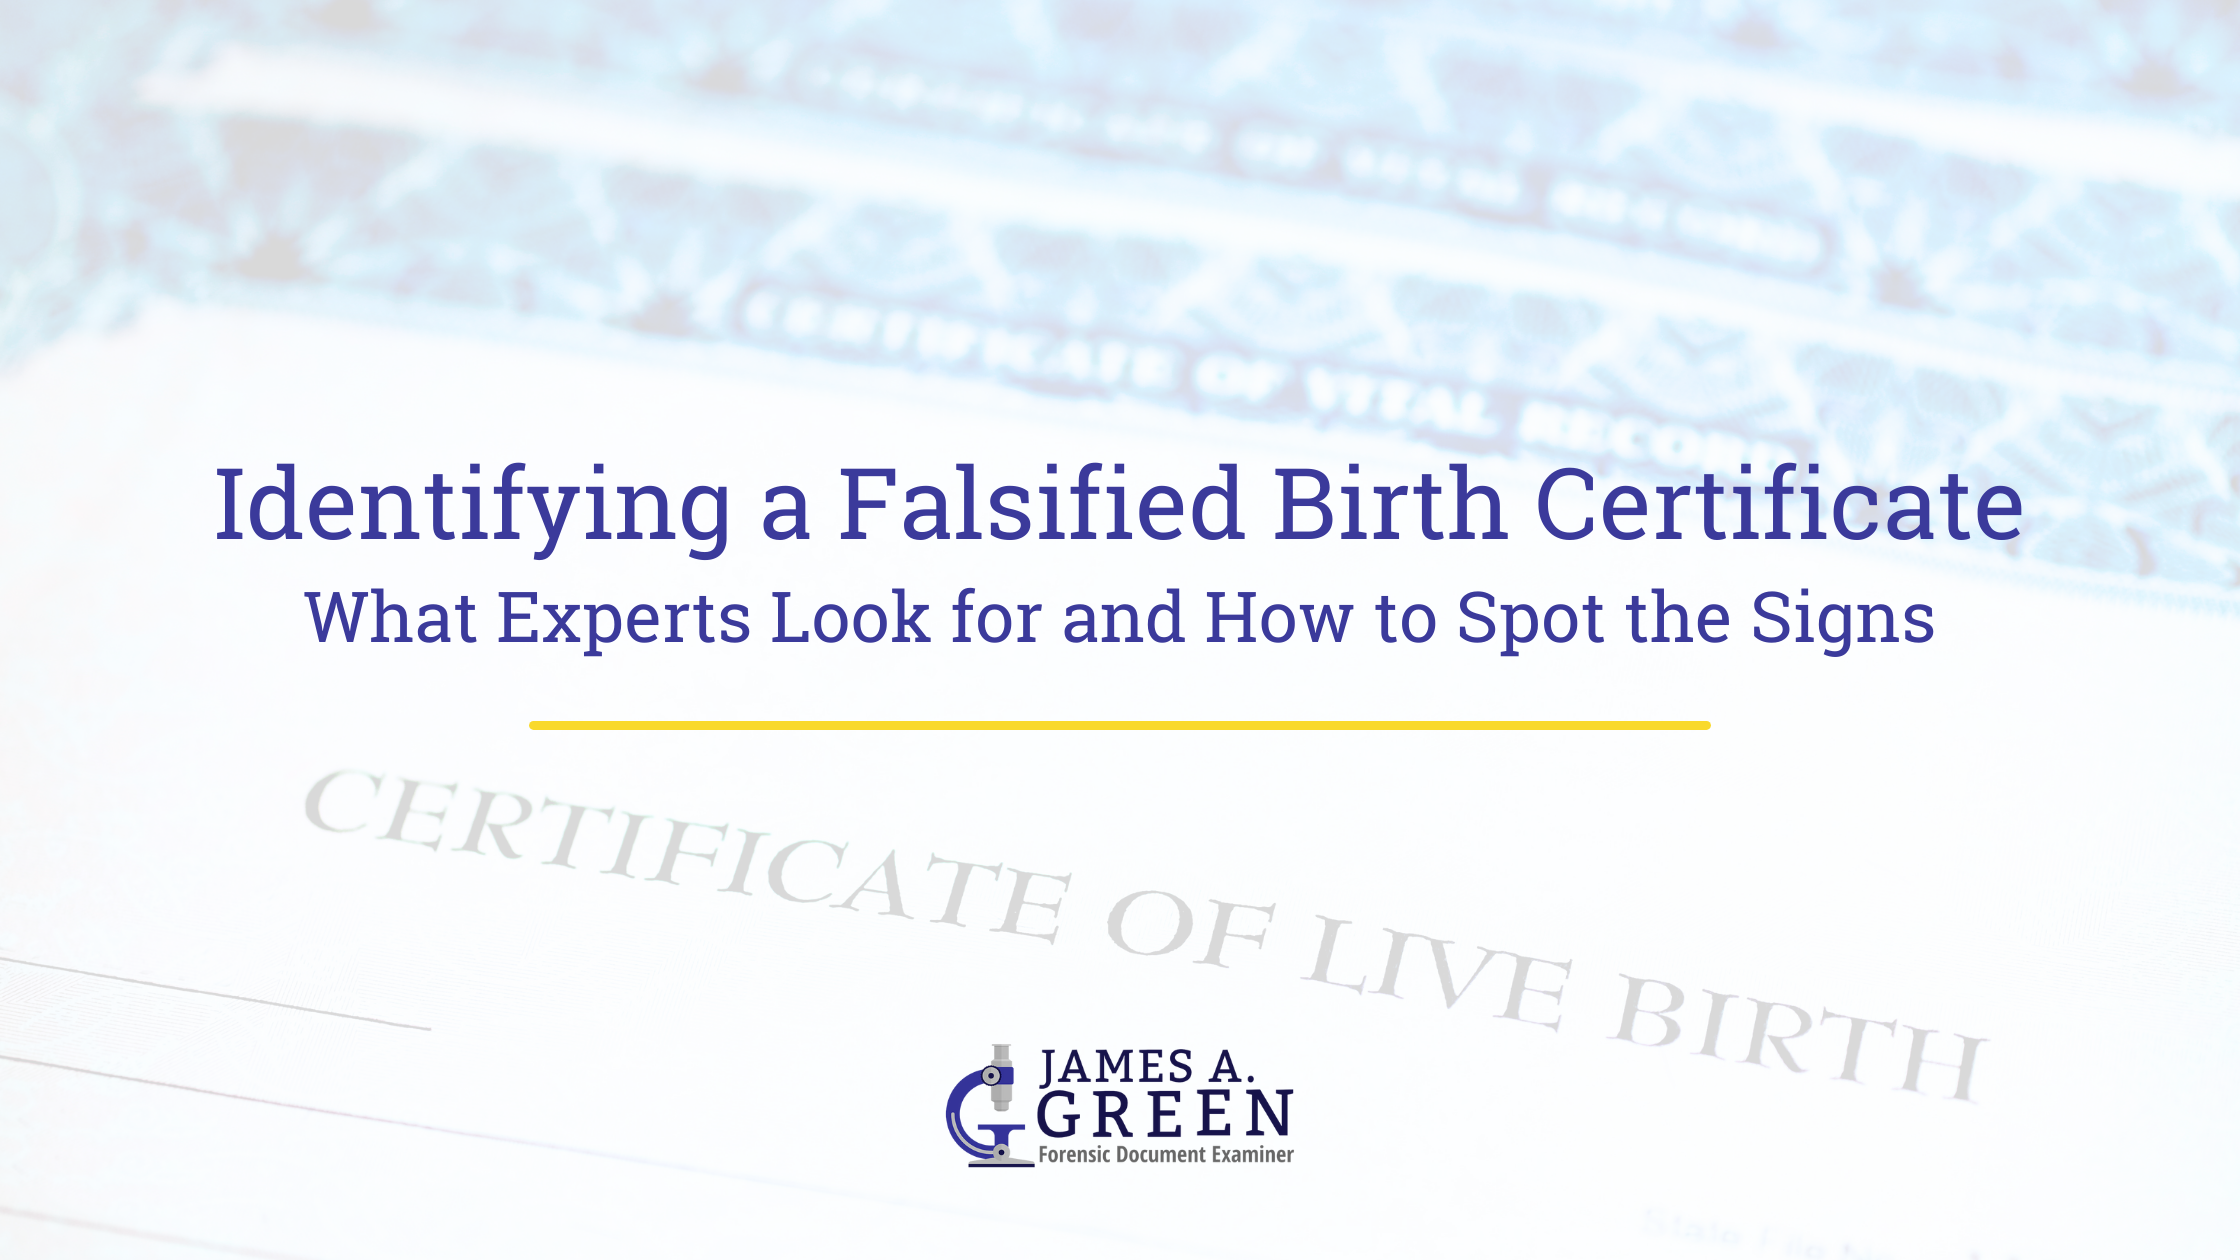 Identifying a Falsified Birth Certificate – What Experts Look for and How to Spot the Signs